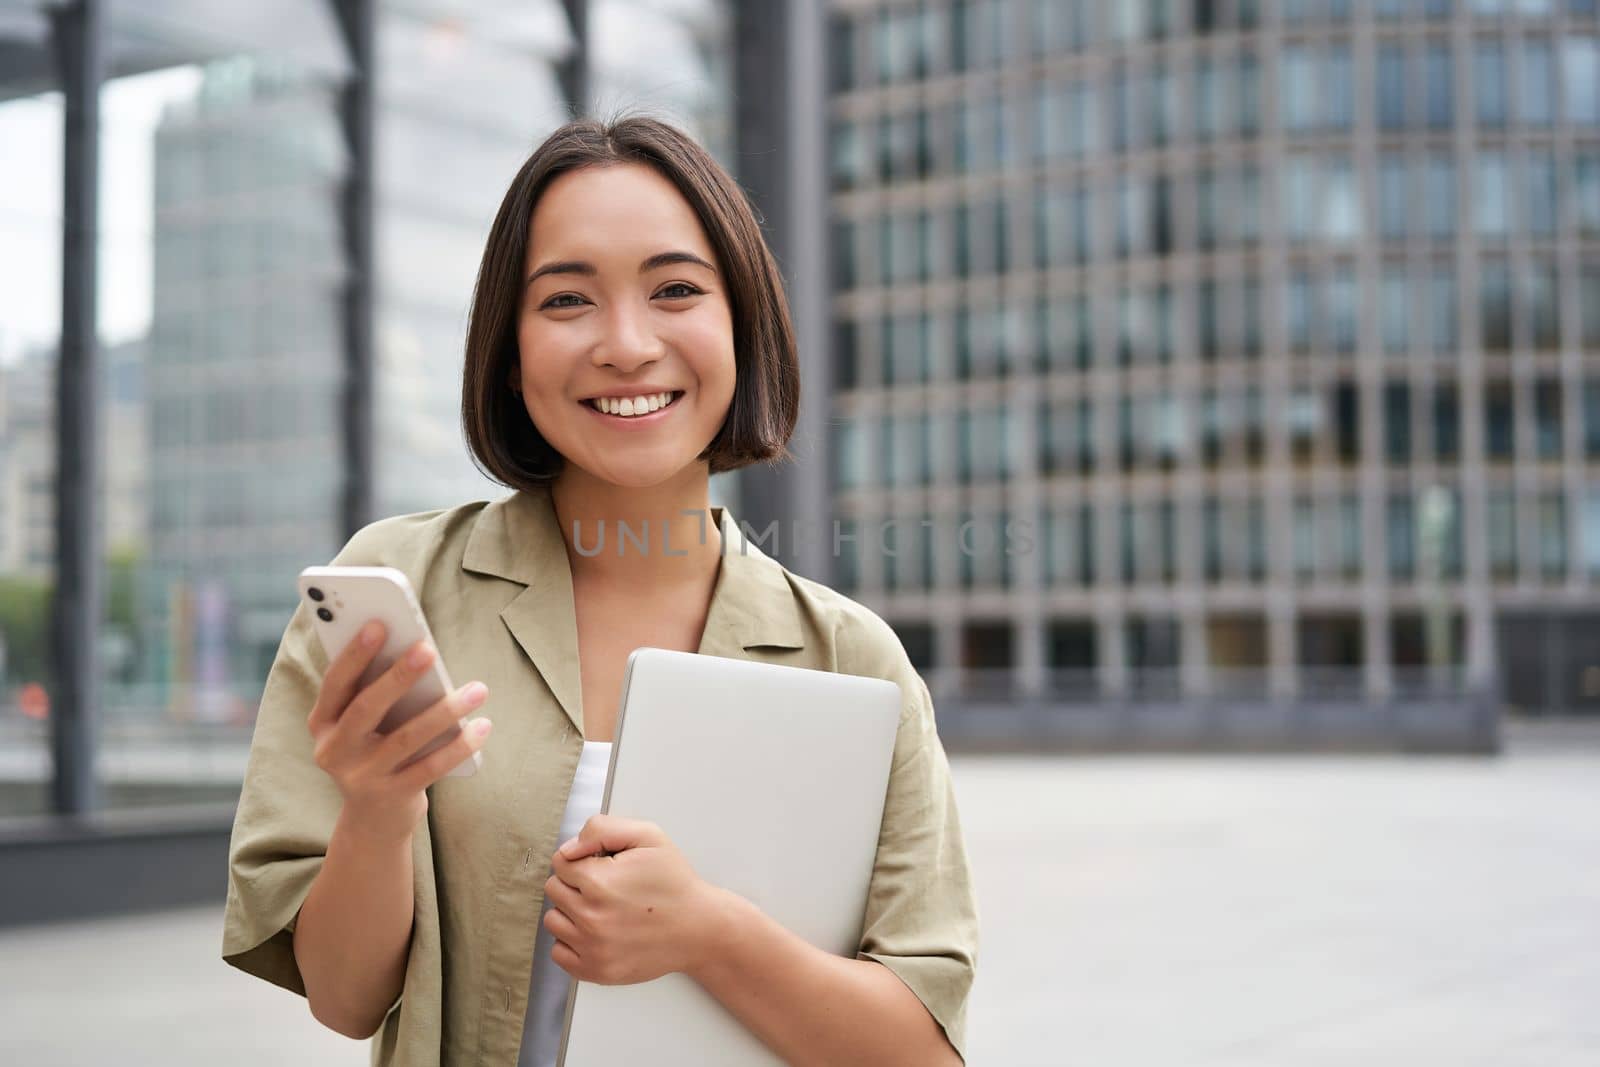 Portrait of smiling asian girl with laptop, holds mobile phone and looks happy at camera, stands on street.